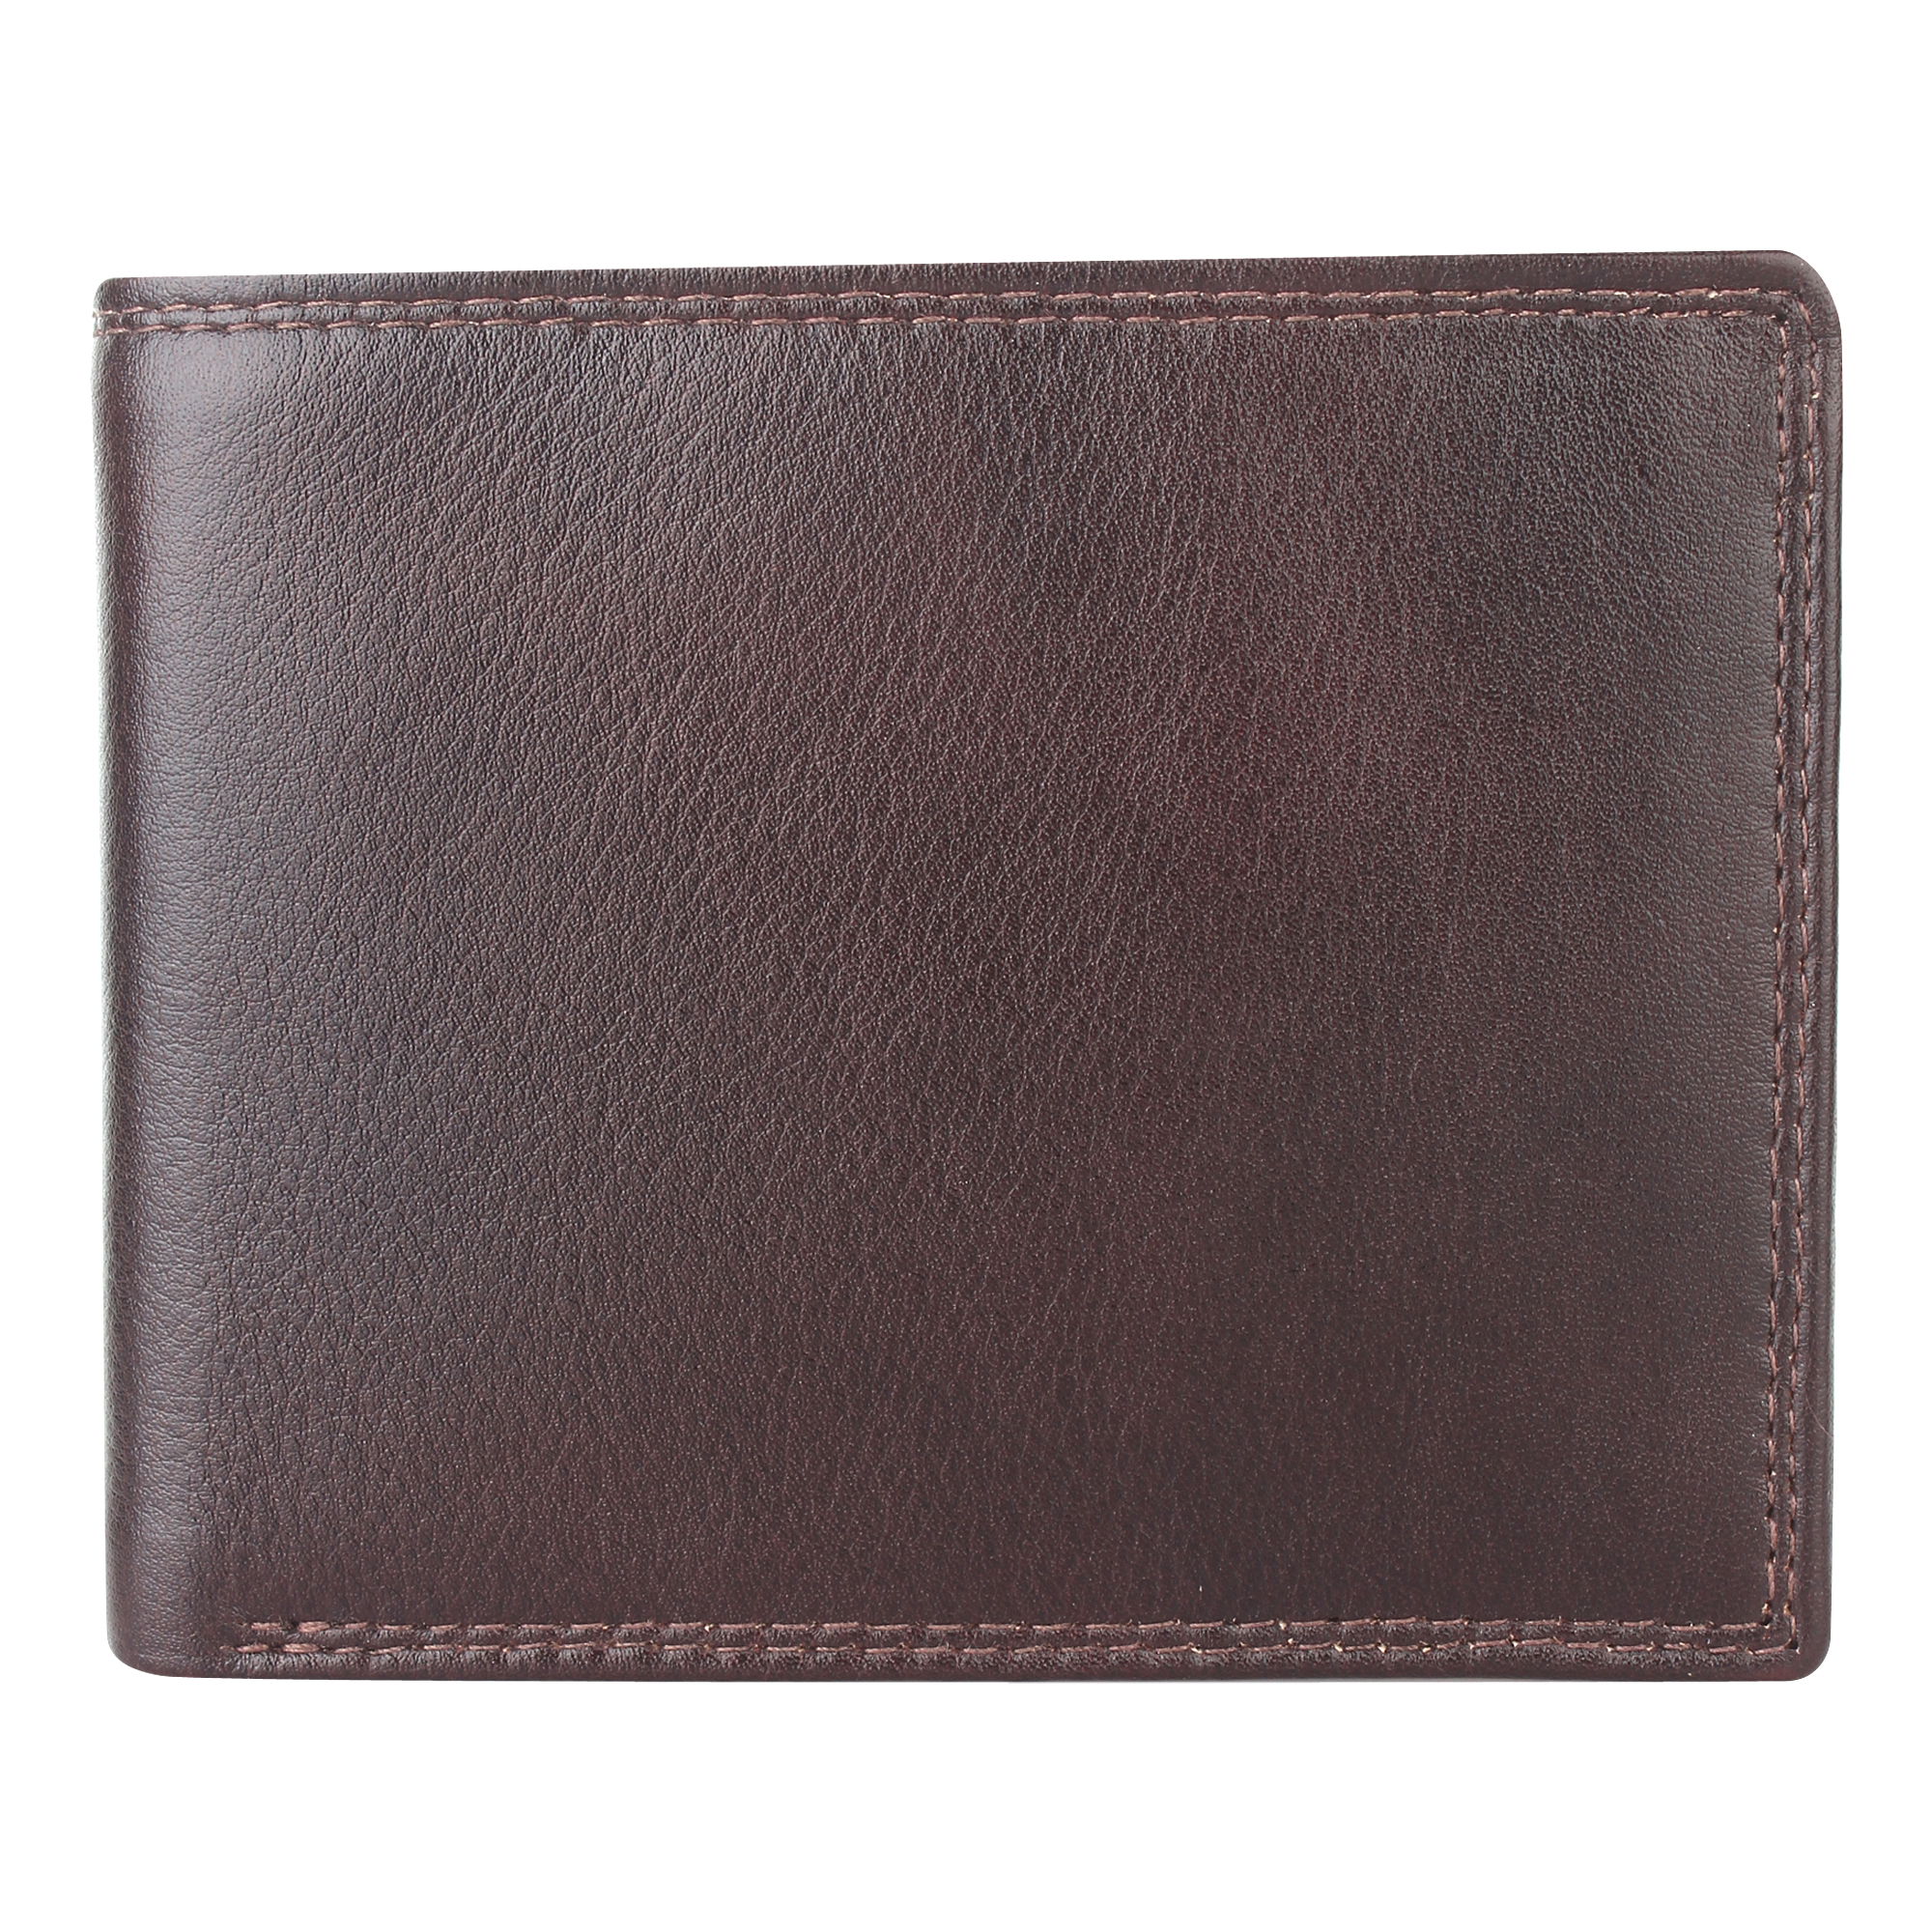 Leather Wallets Manufacturers in Delhi, Leather Wallets Suppliers in Delhi, Leather Wallets Wholesalers in Delhi, Leather Wallets Traders in Delhi, custom leather wallet manufacturers in Delhi, Leathe